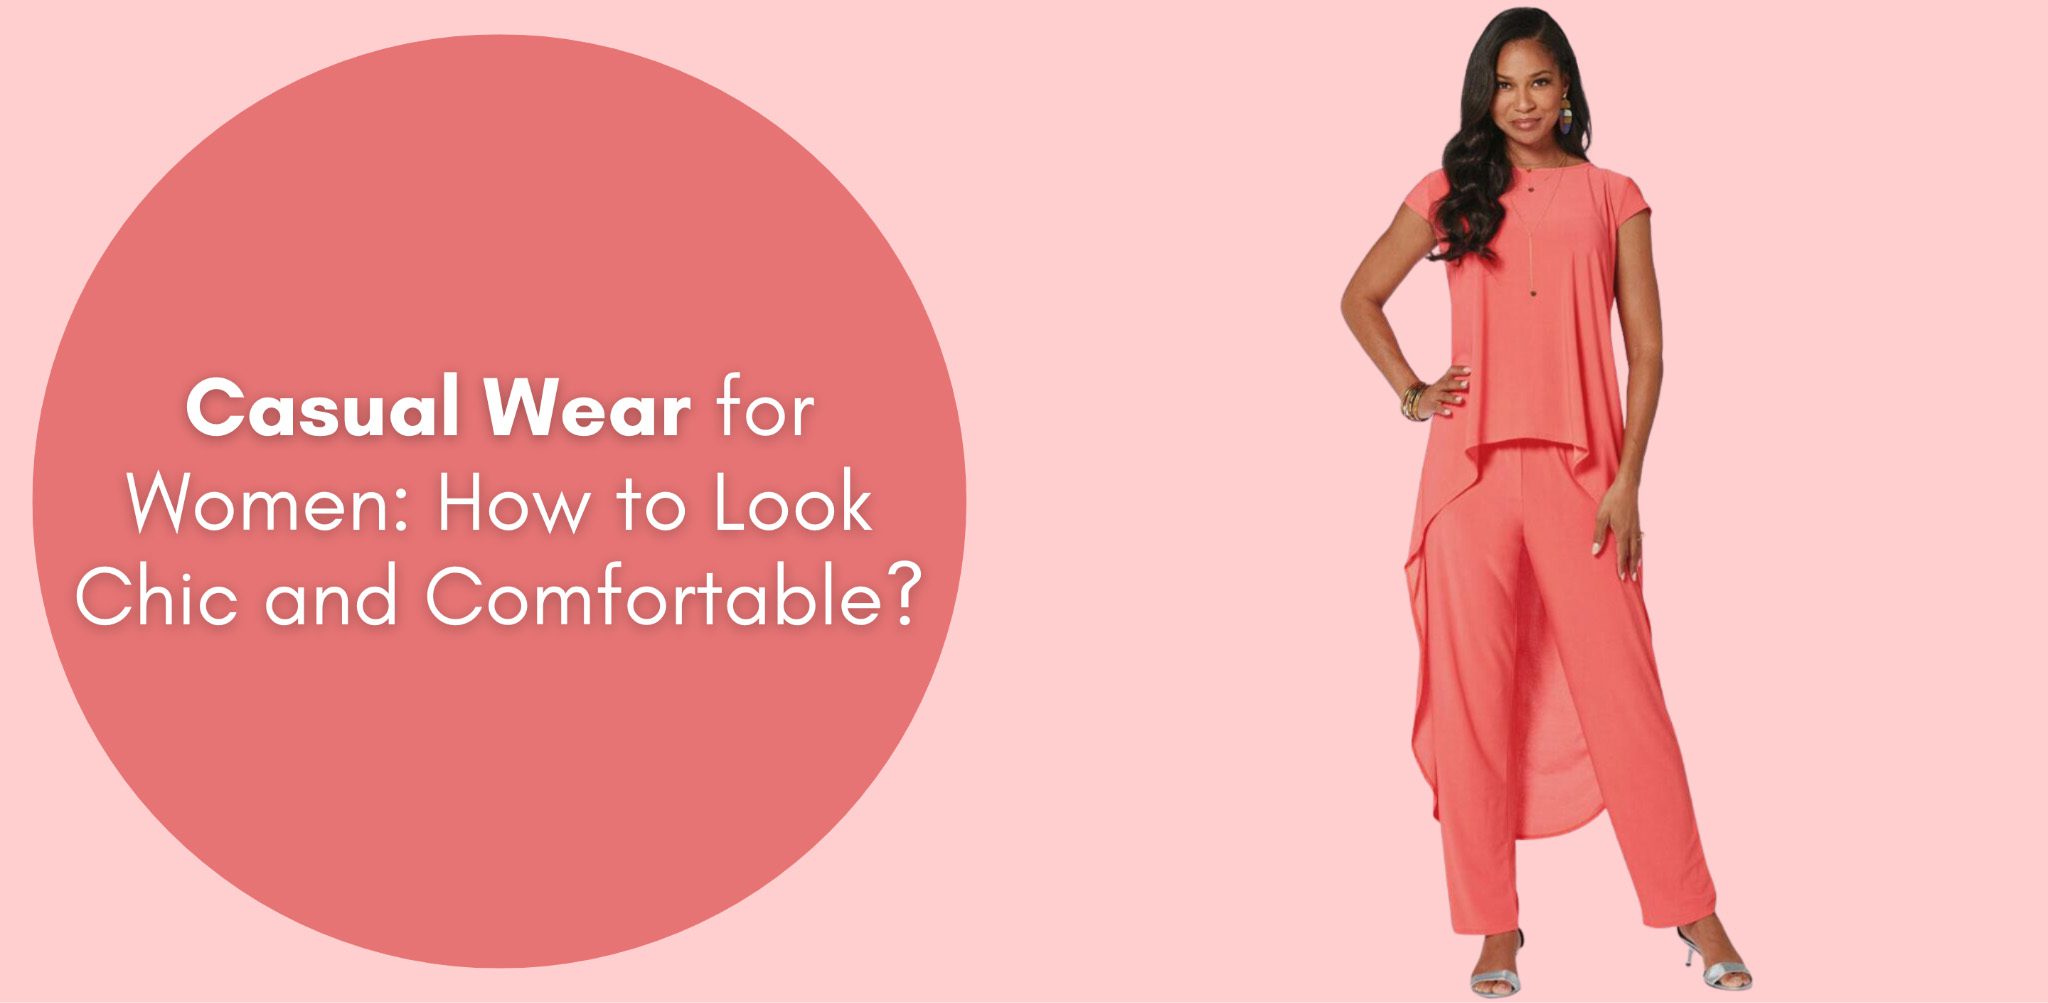 Casual Wear for Women: How to Look Chic and Comfortable?